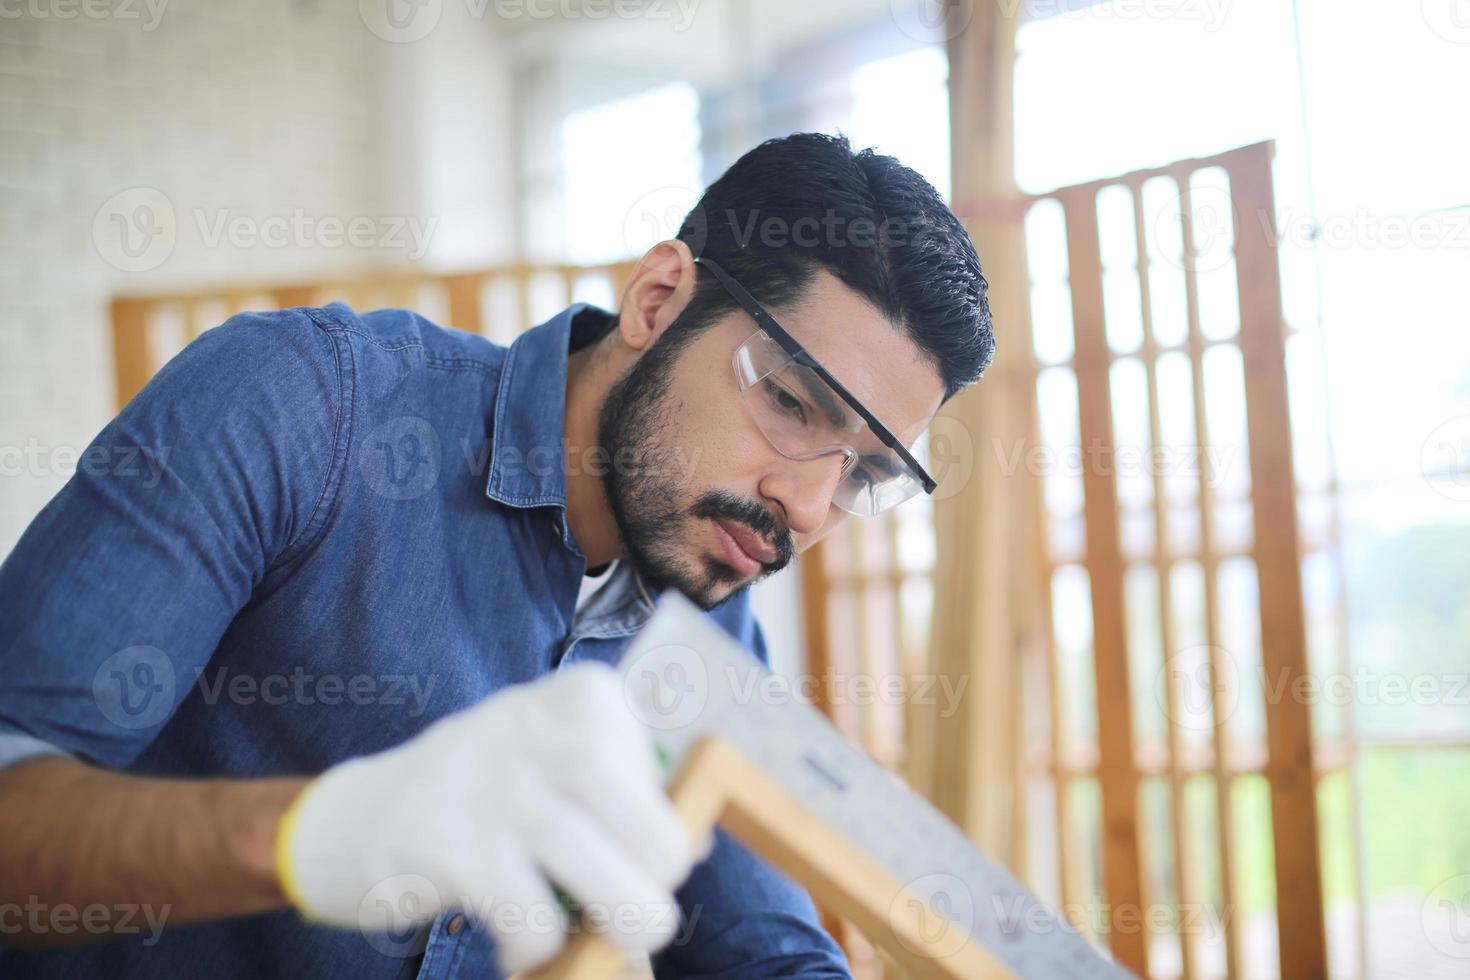 Carpenter grinding joinery product with carvings, finishing woodwork at the carpentry manufacturing photo